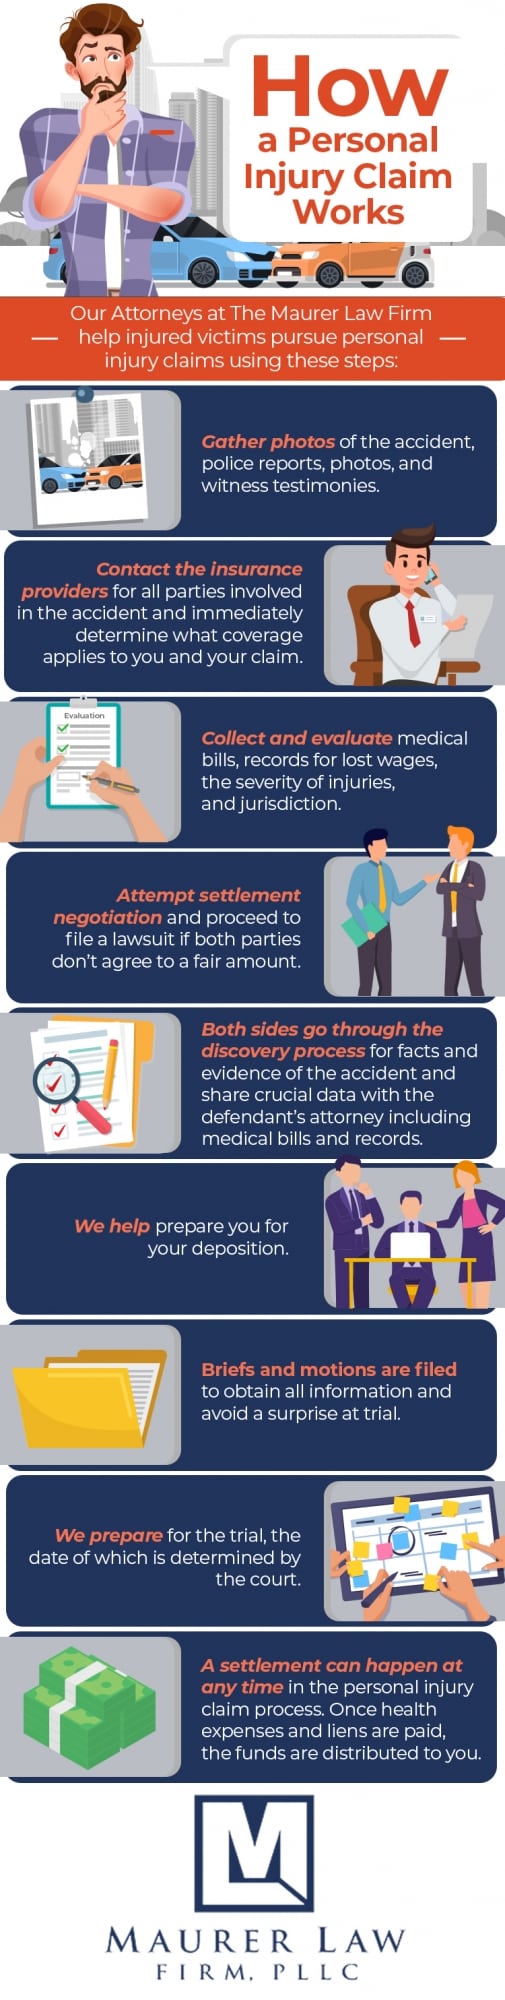 Infographic explains personal injury claims, settlements, and lawsuits